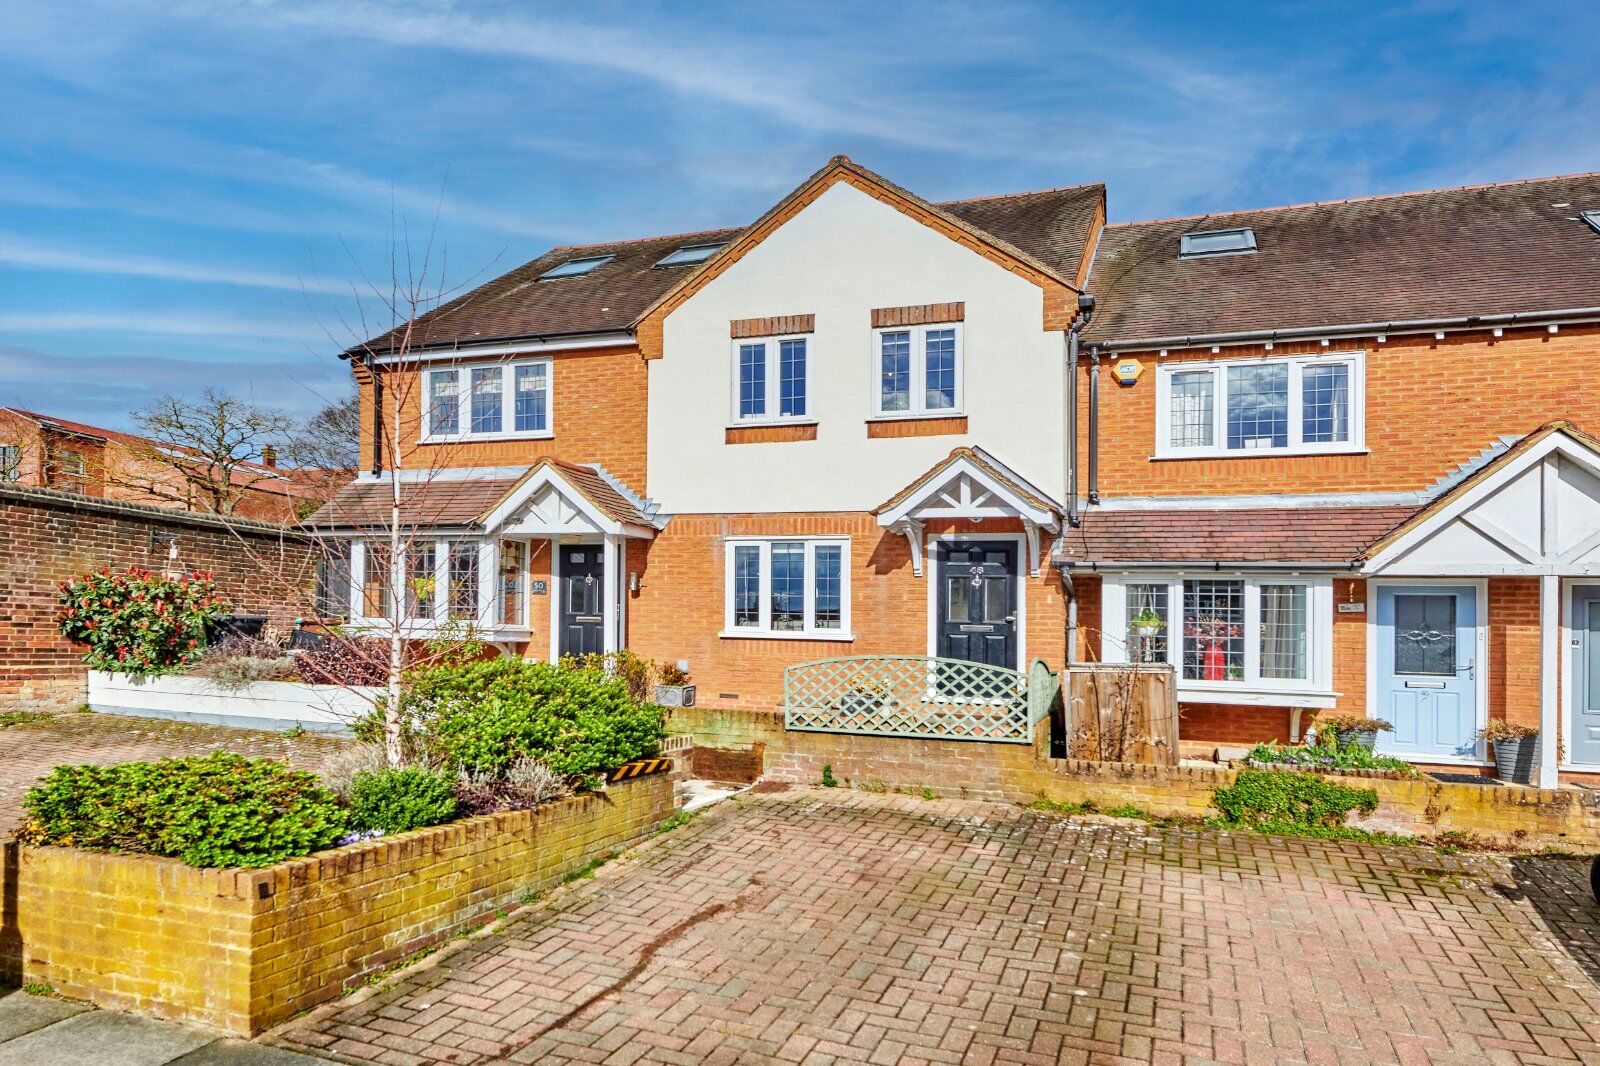 3 bedroom mid terraced house for sale Hart Road, St. Albans, AL1, main image